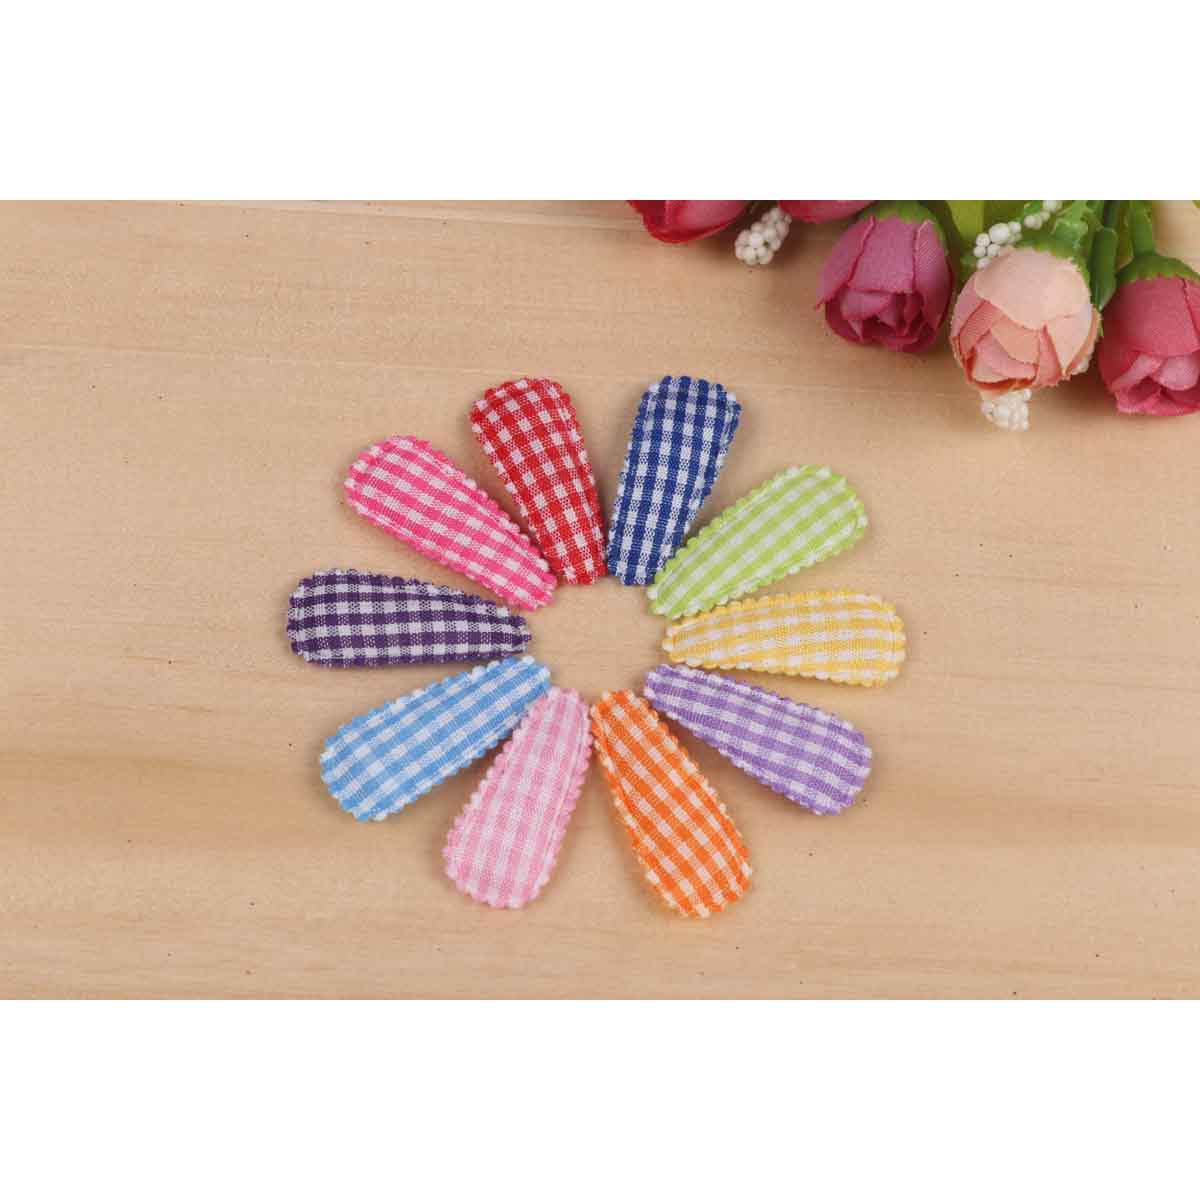 100 Padded Gingham Hair Clip Covers 35mm-10 Colors